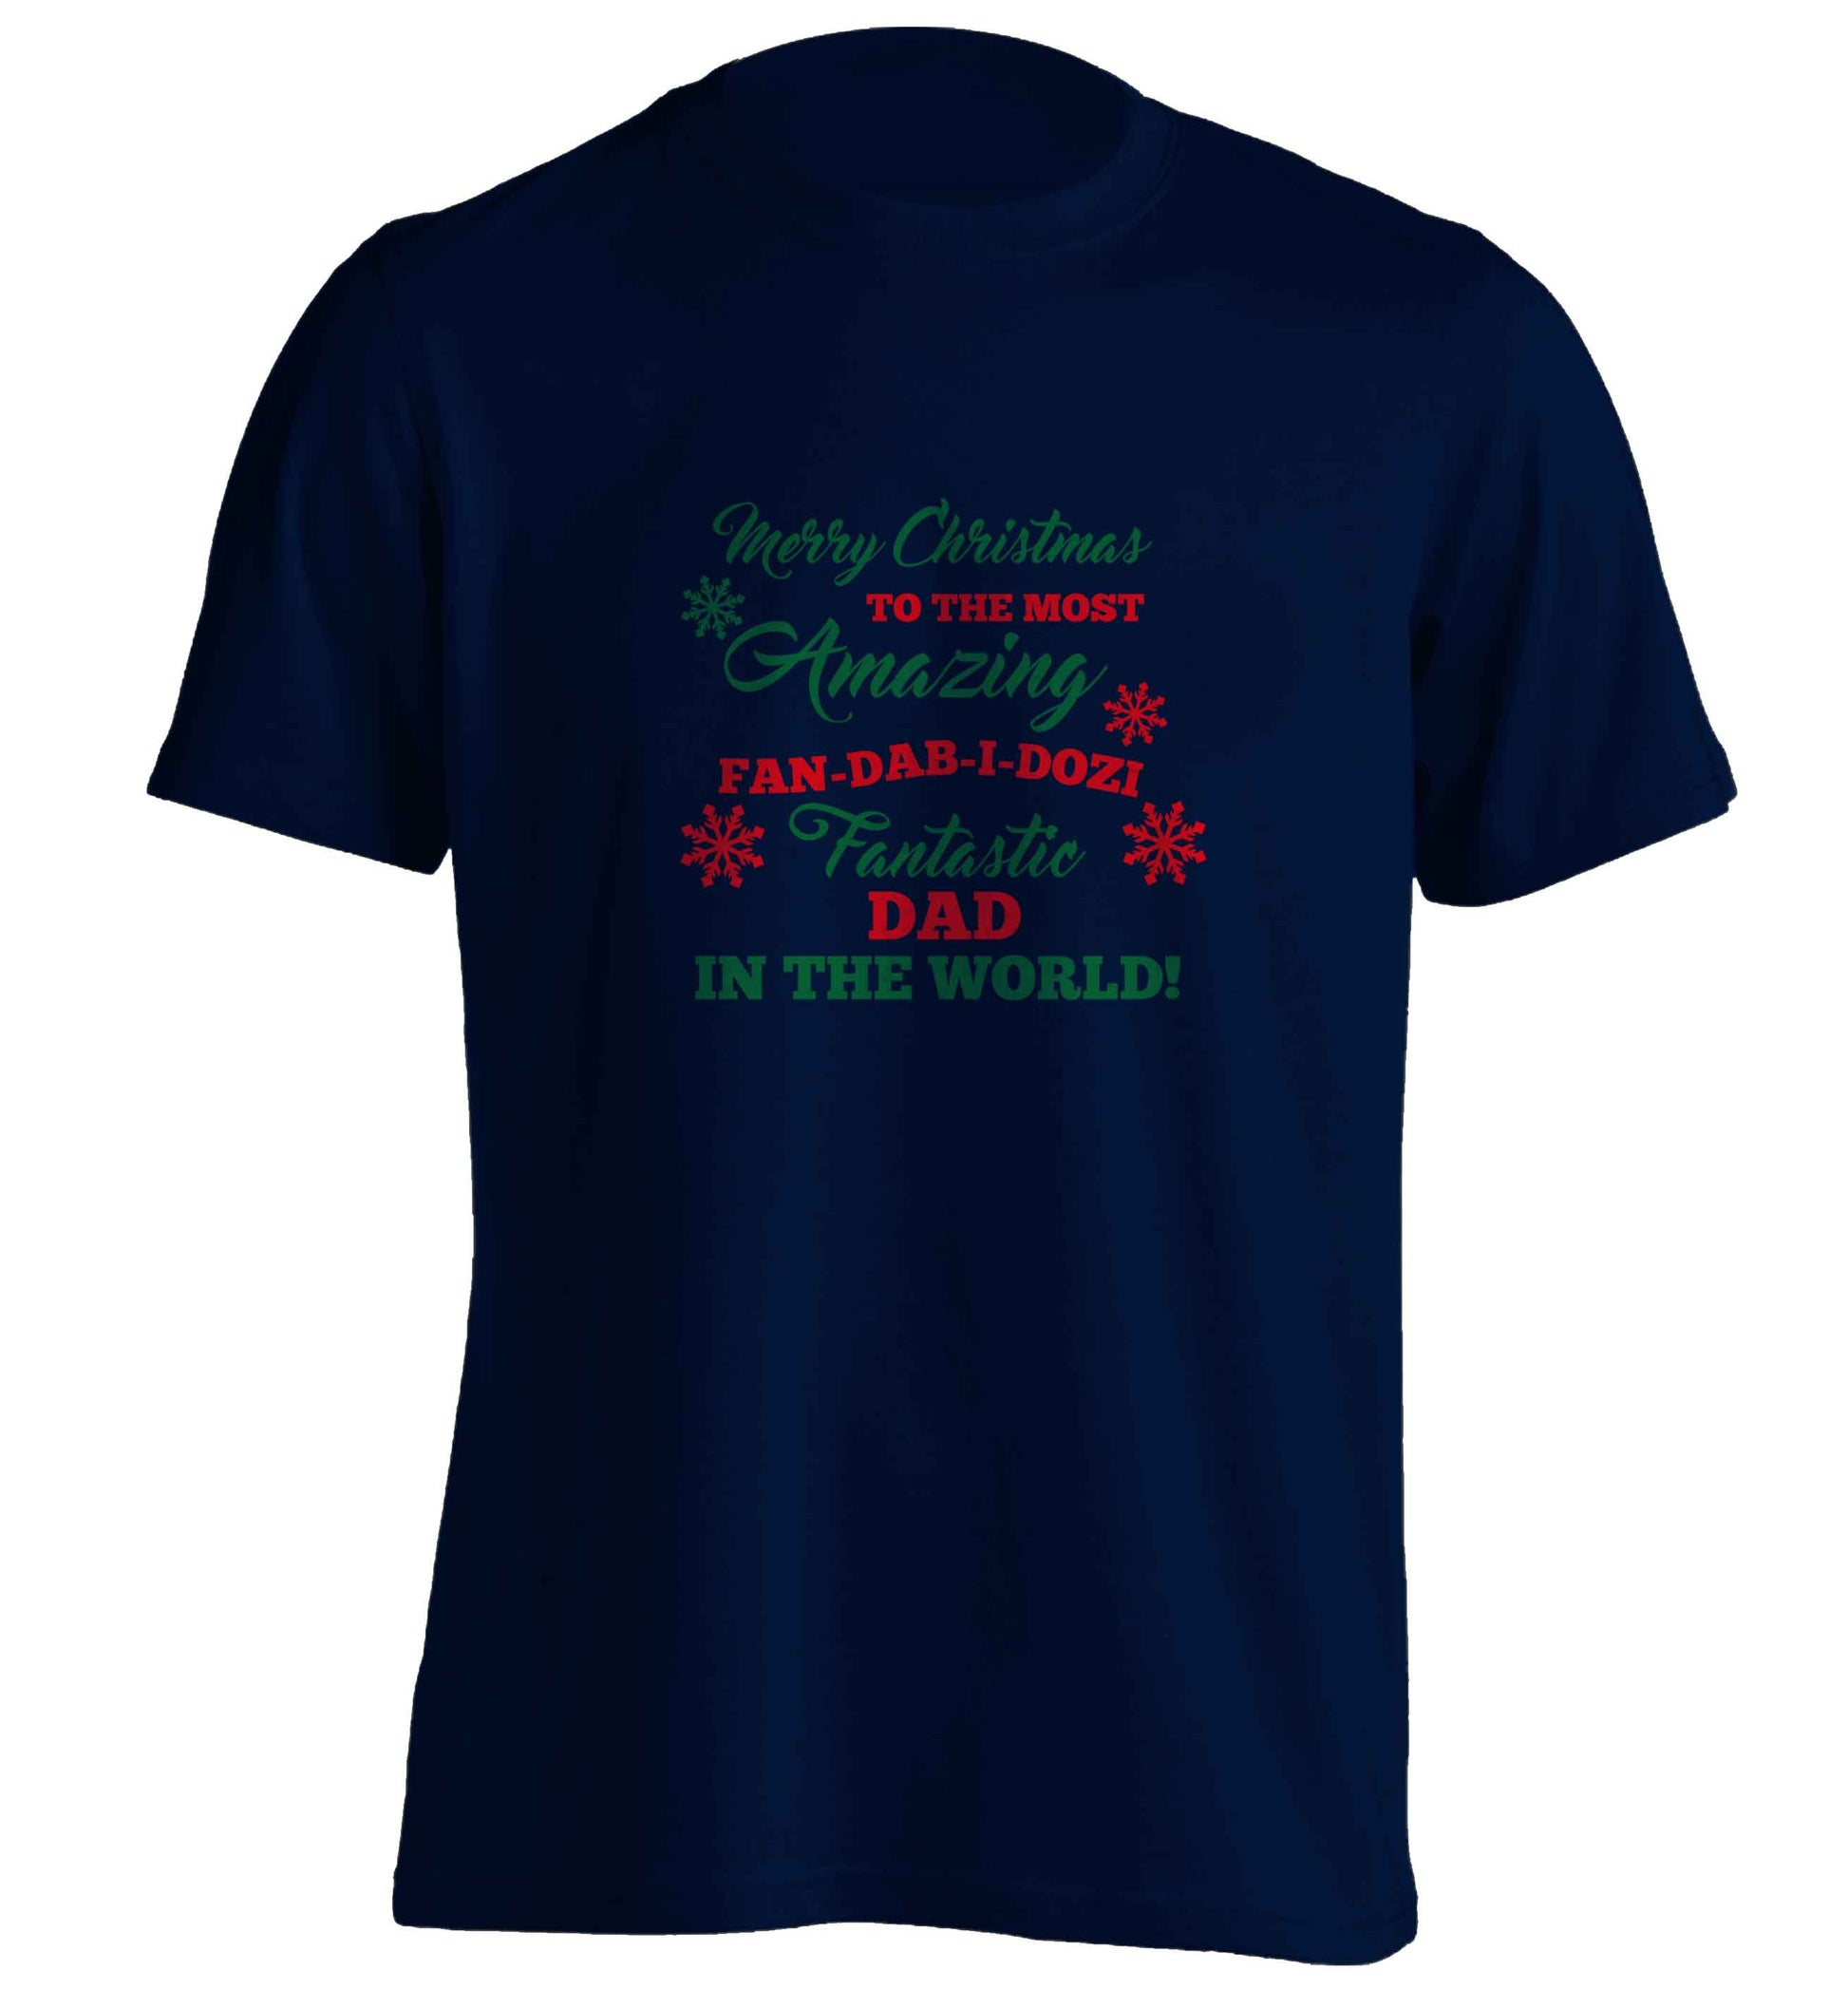 Merry Christmas to the most amazing fan-dab-i-dozi fantasic Dad in the world adults unisex navy Tshirt 2XL